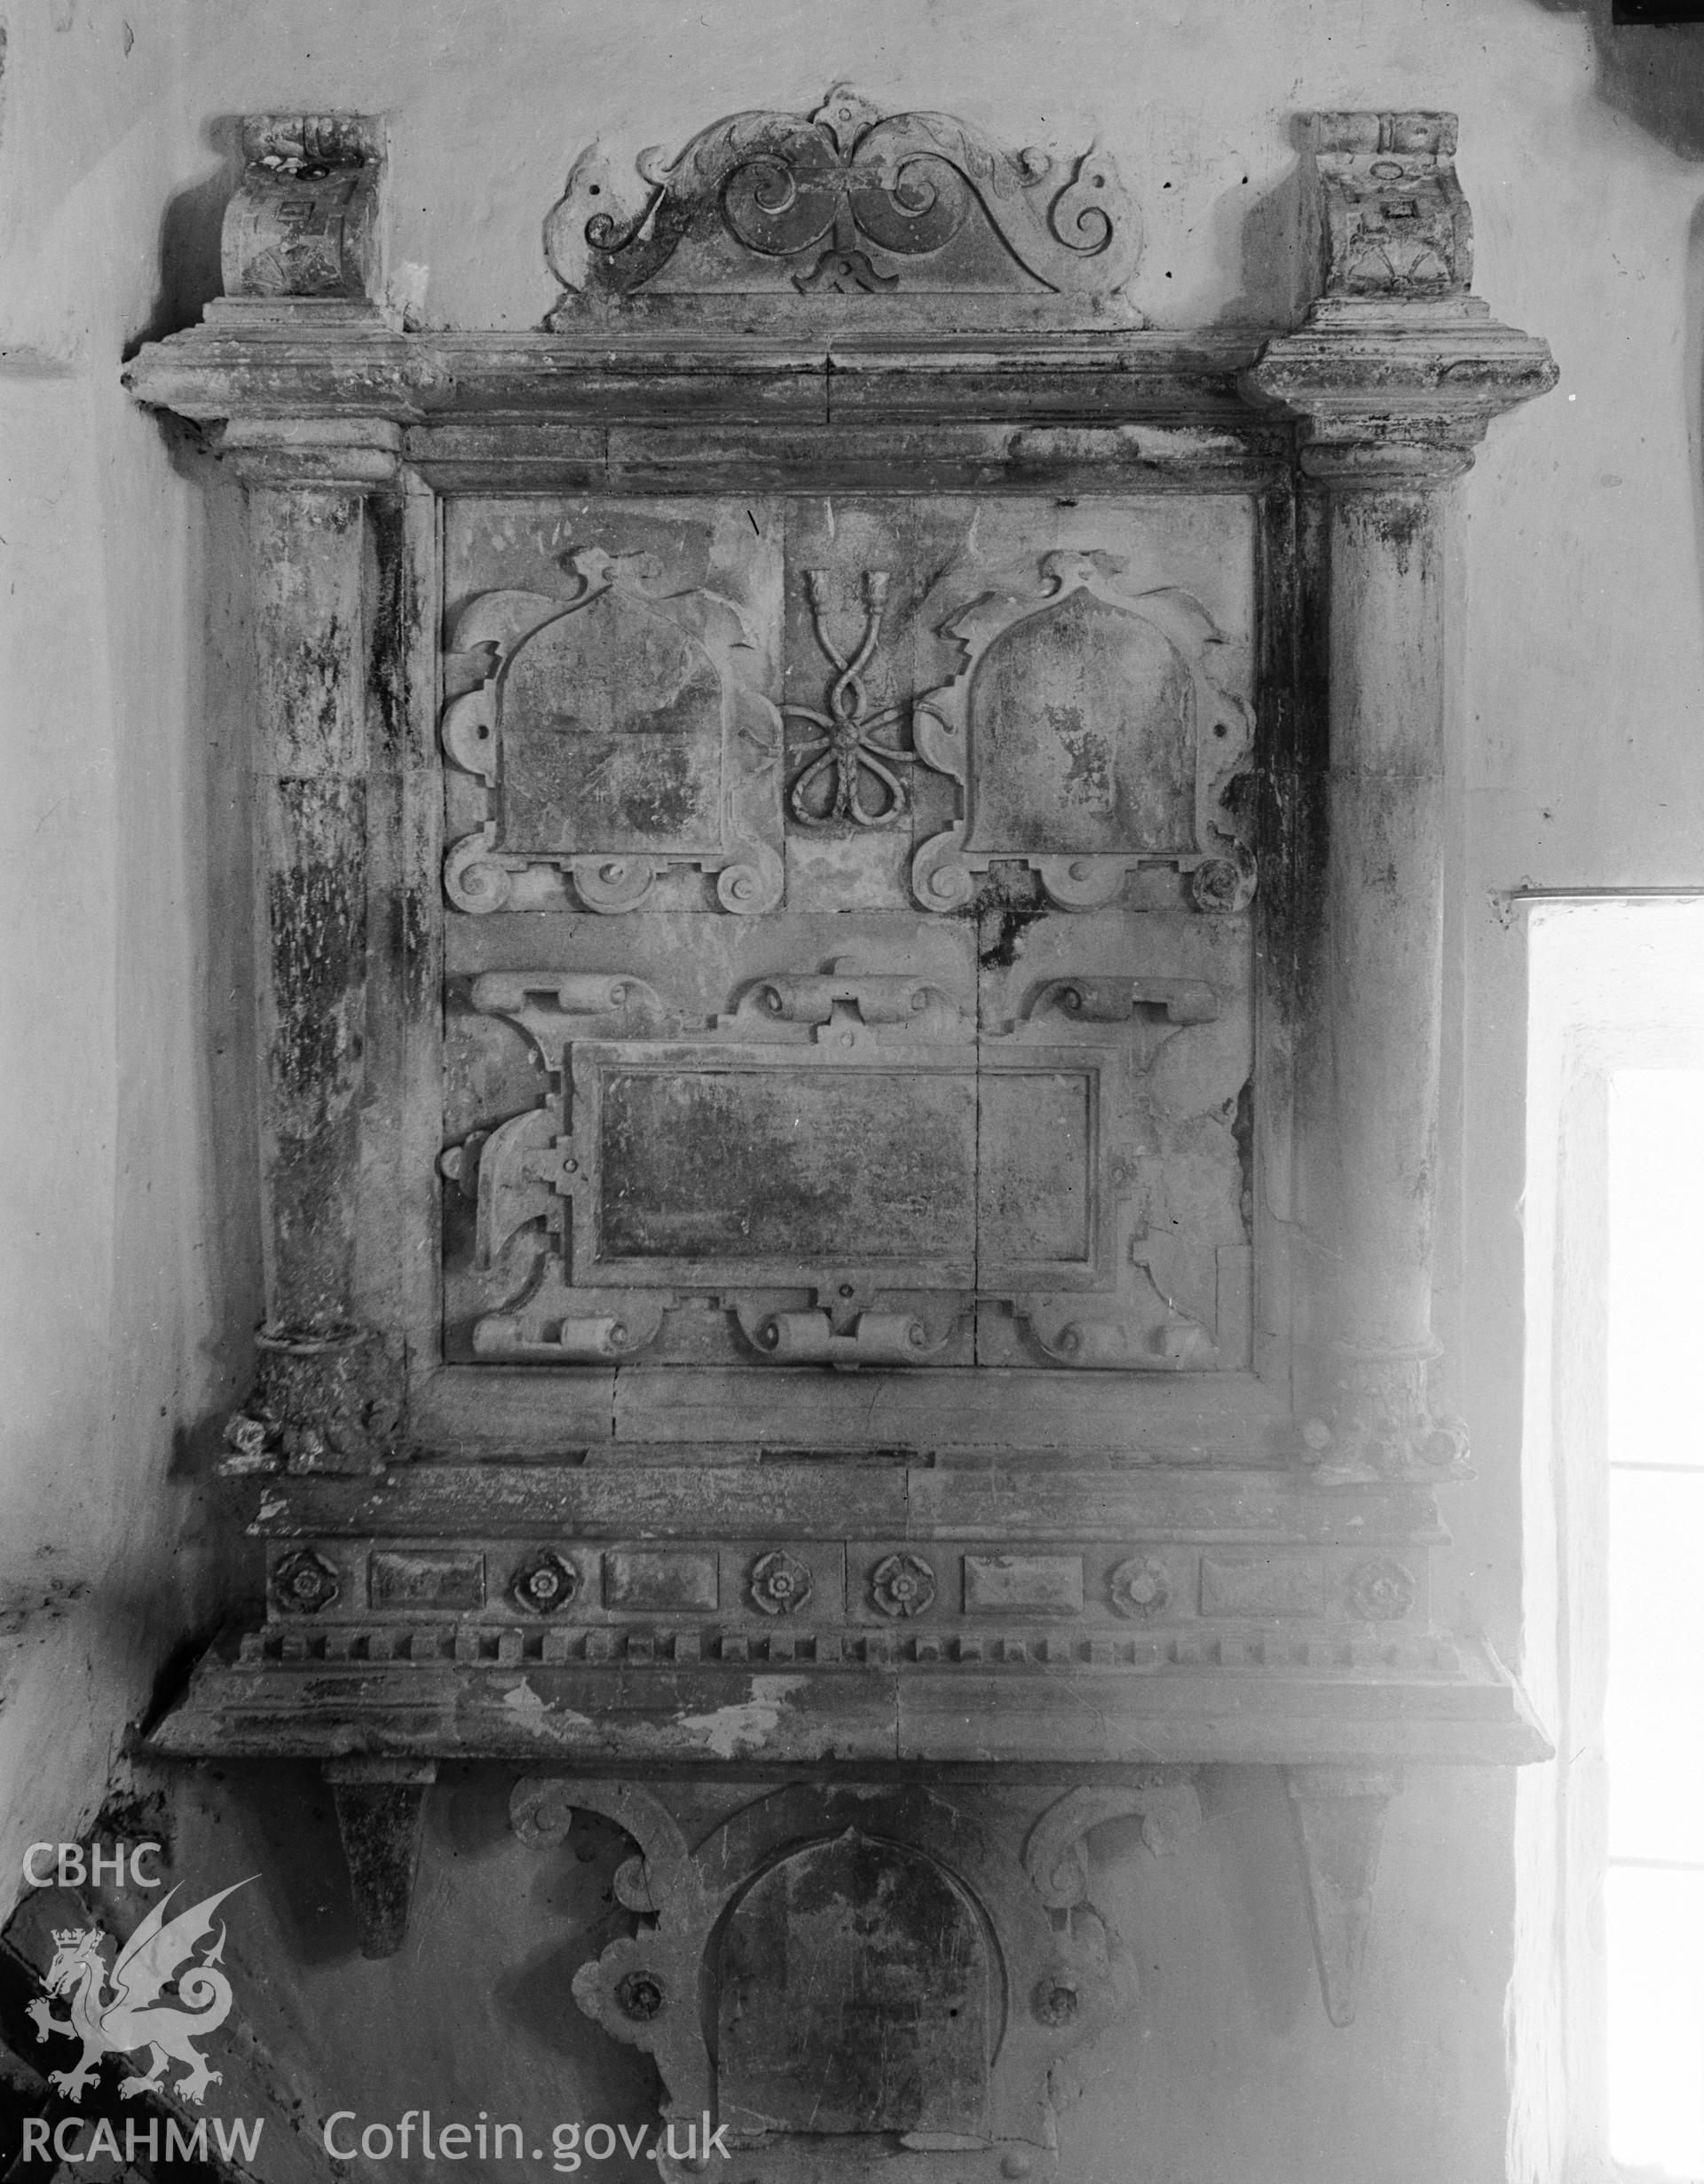 View of memorial on the east wall of the chancel in Loveston Church taken in 29.08.1941.